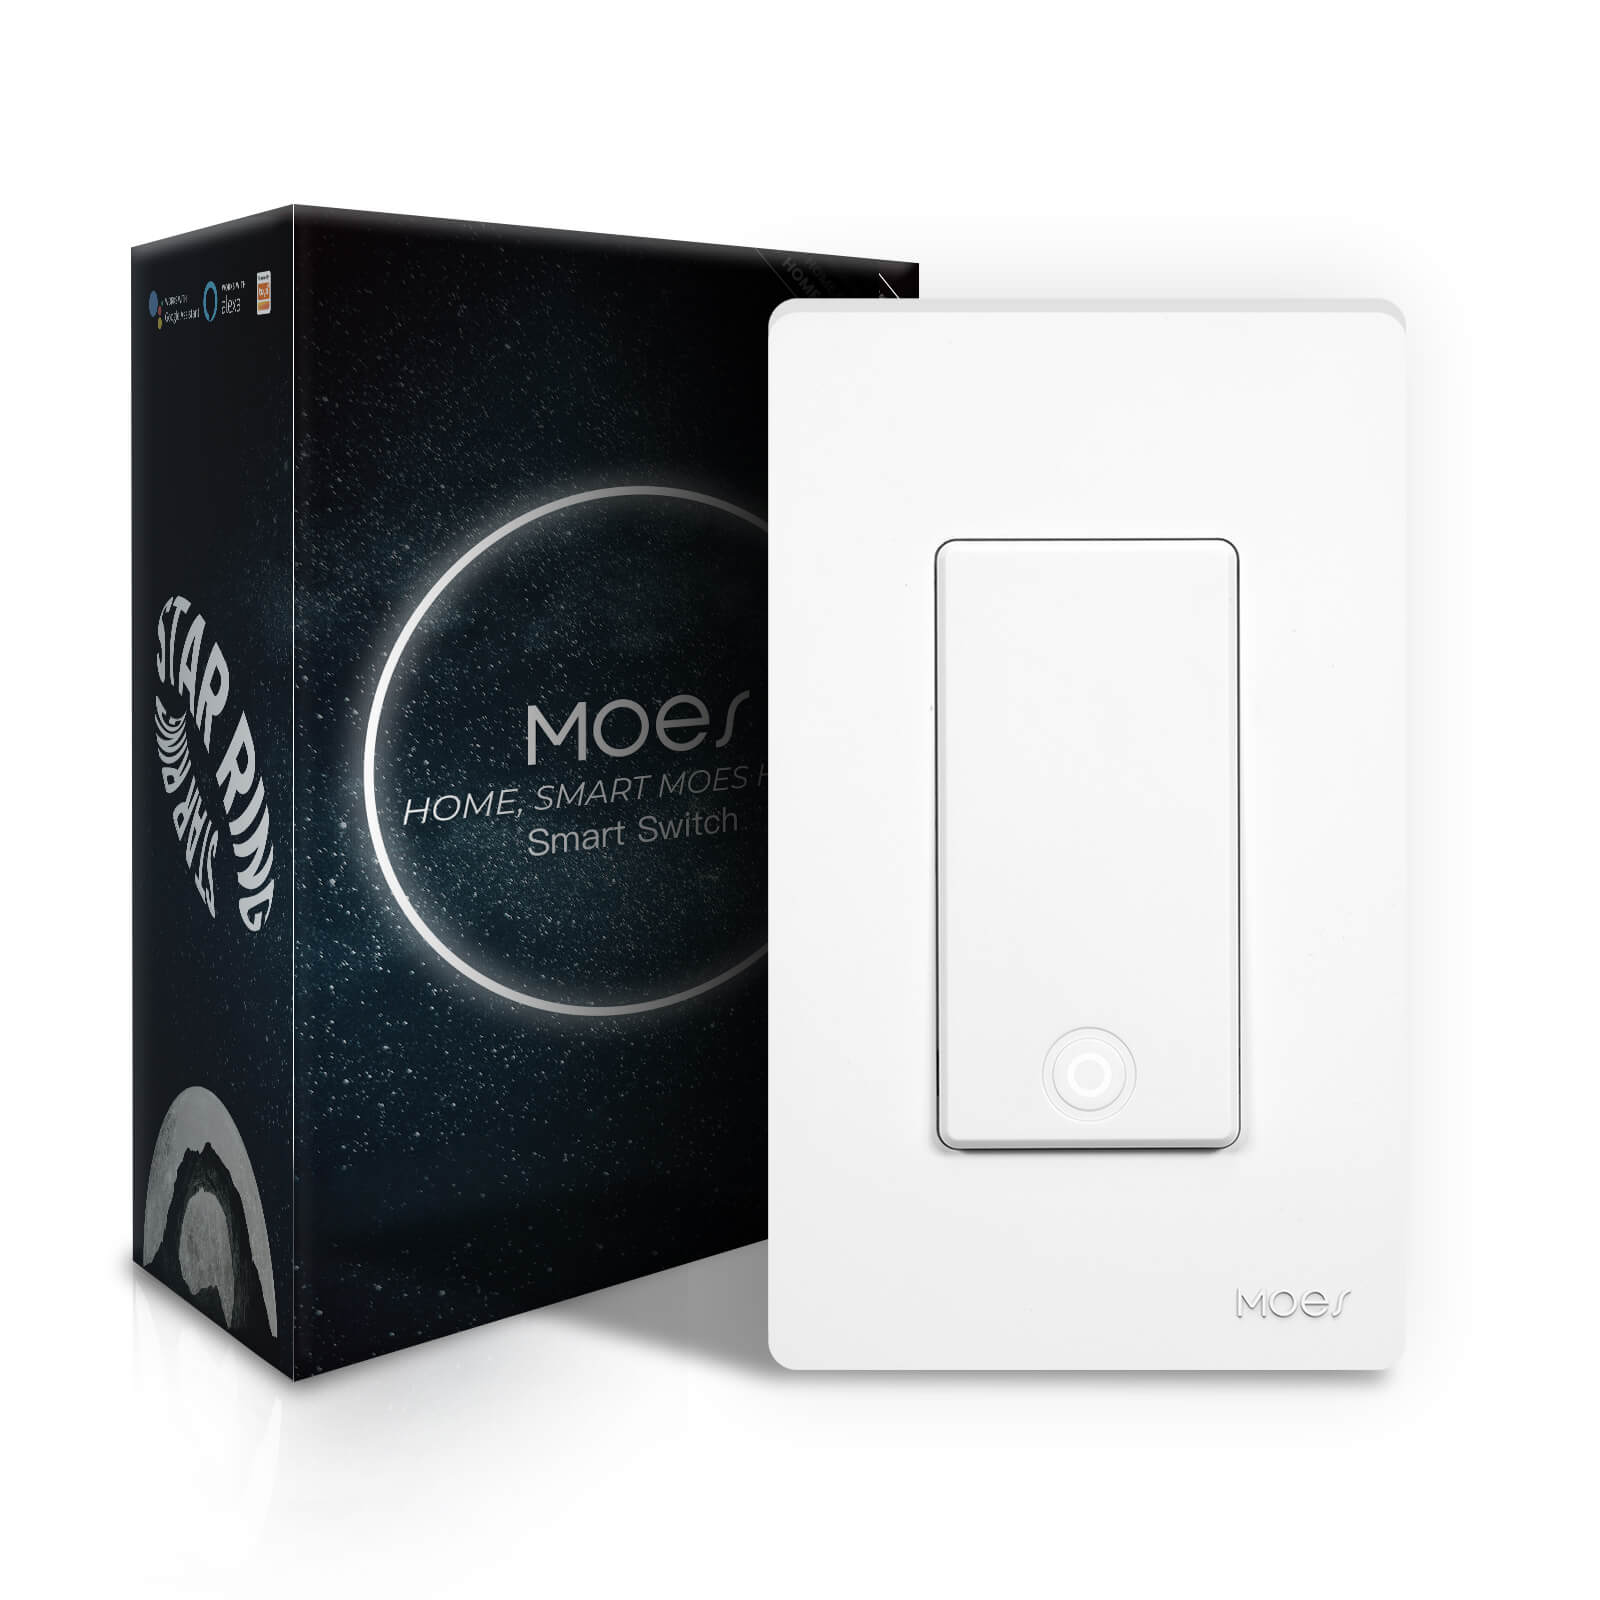 MOES Star Ring Switch No CapacitorWiFi Smart Light Switch No Neutral